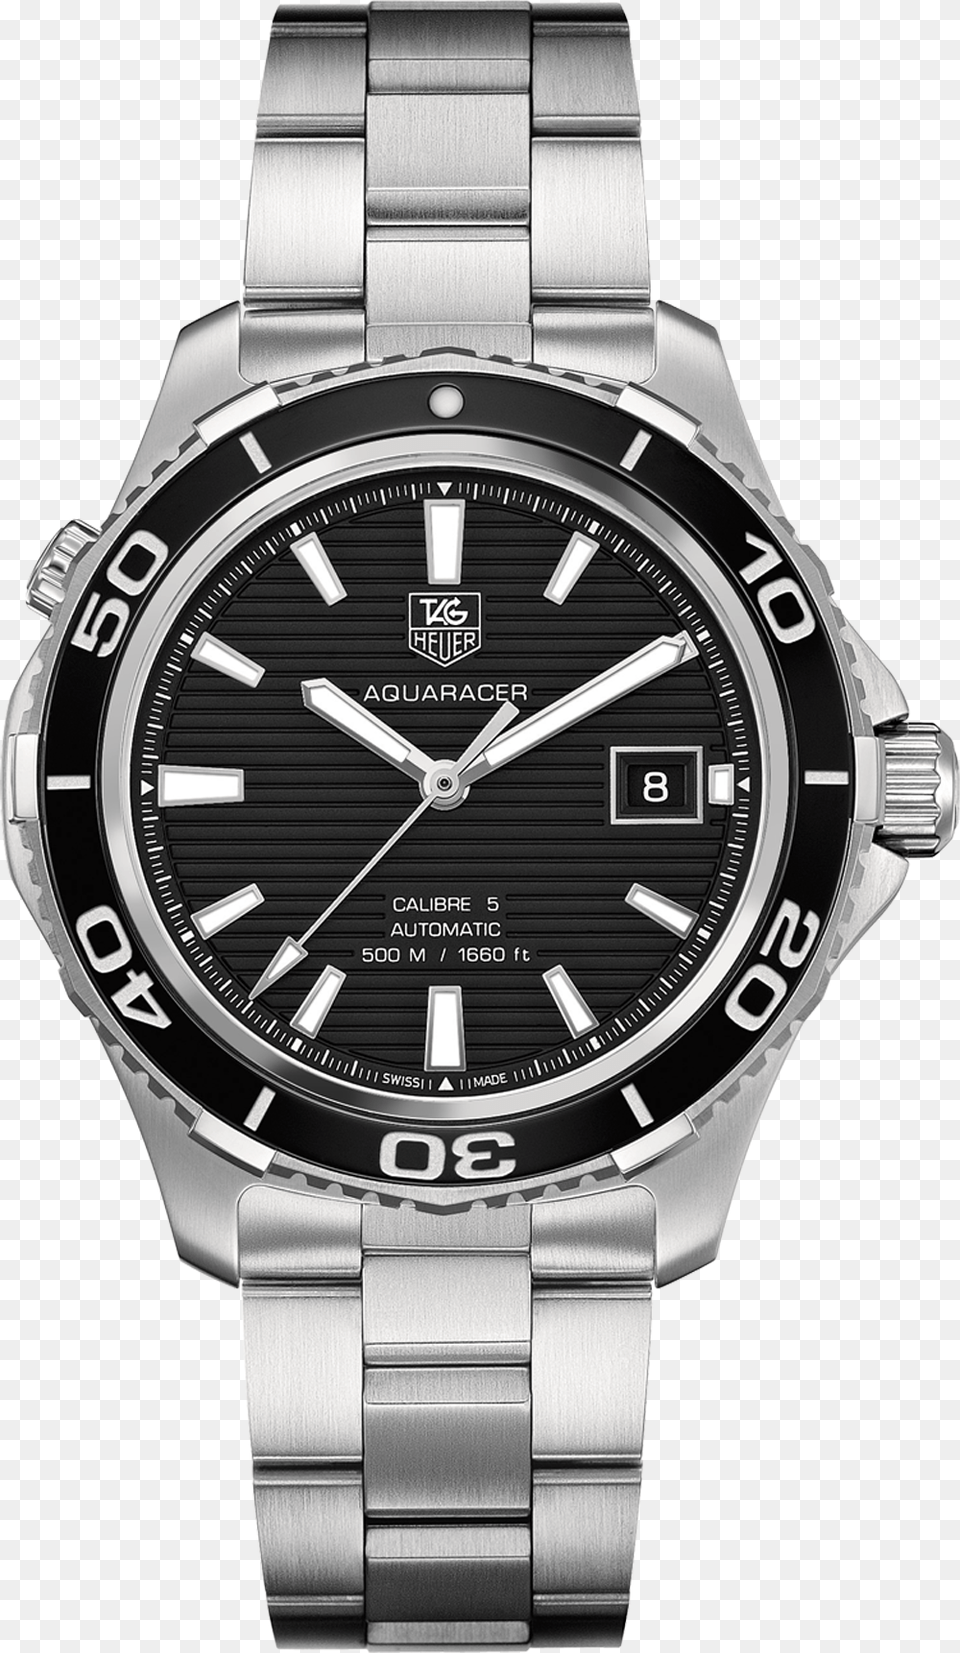 Tag Heuer Wak2110 Tag Heuer Aquaracer, Arm, Body Part, Person, Wristwatch Png